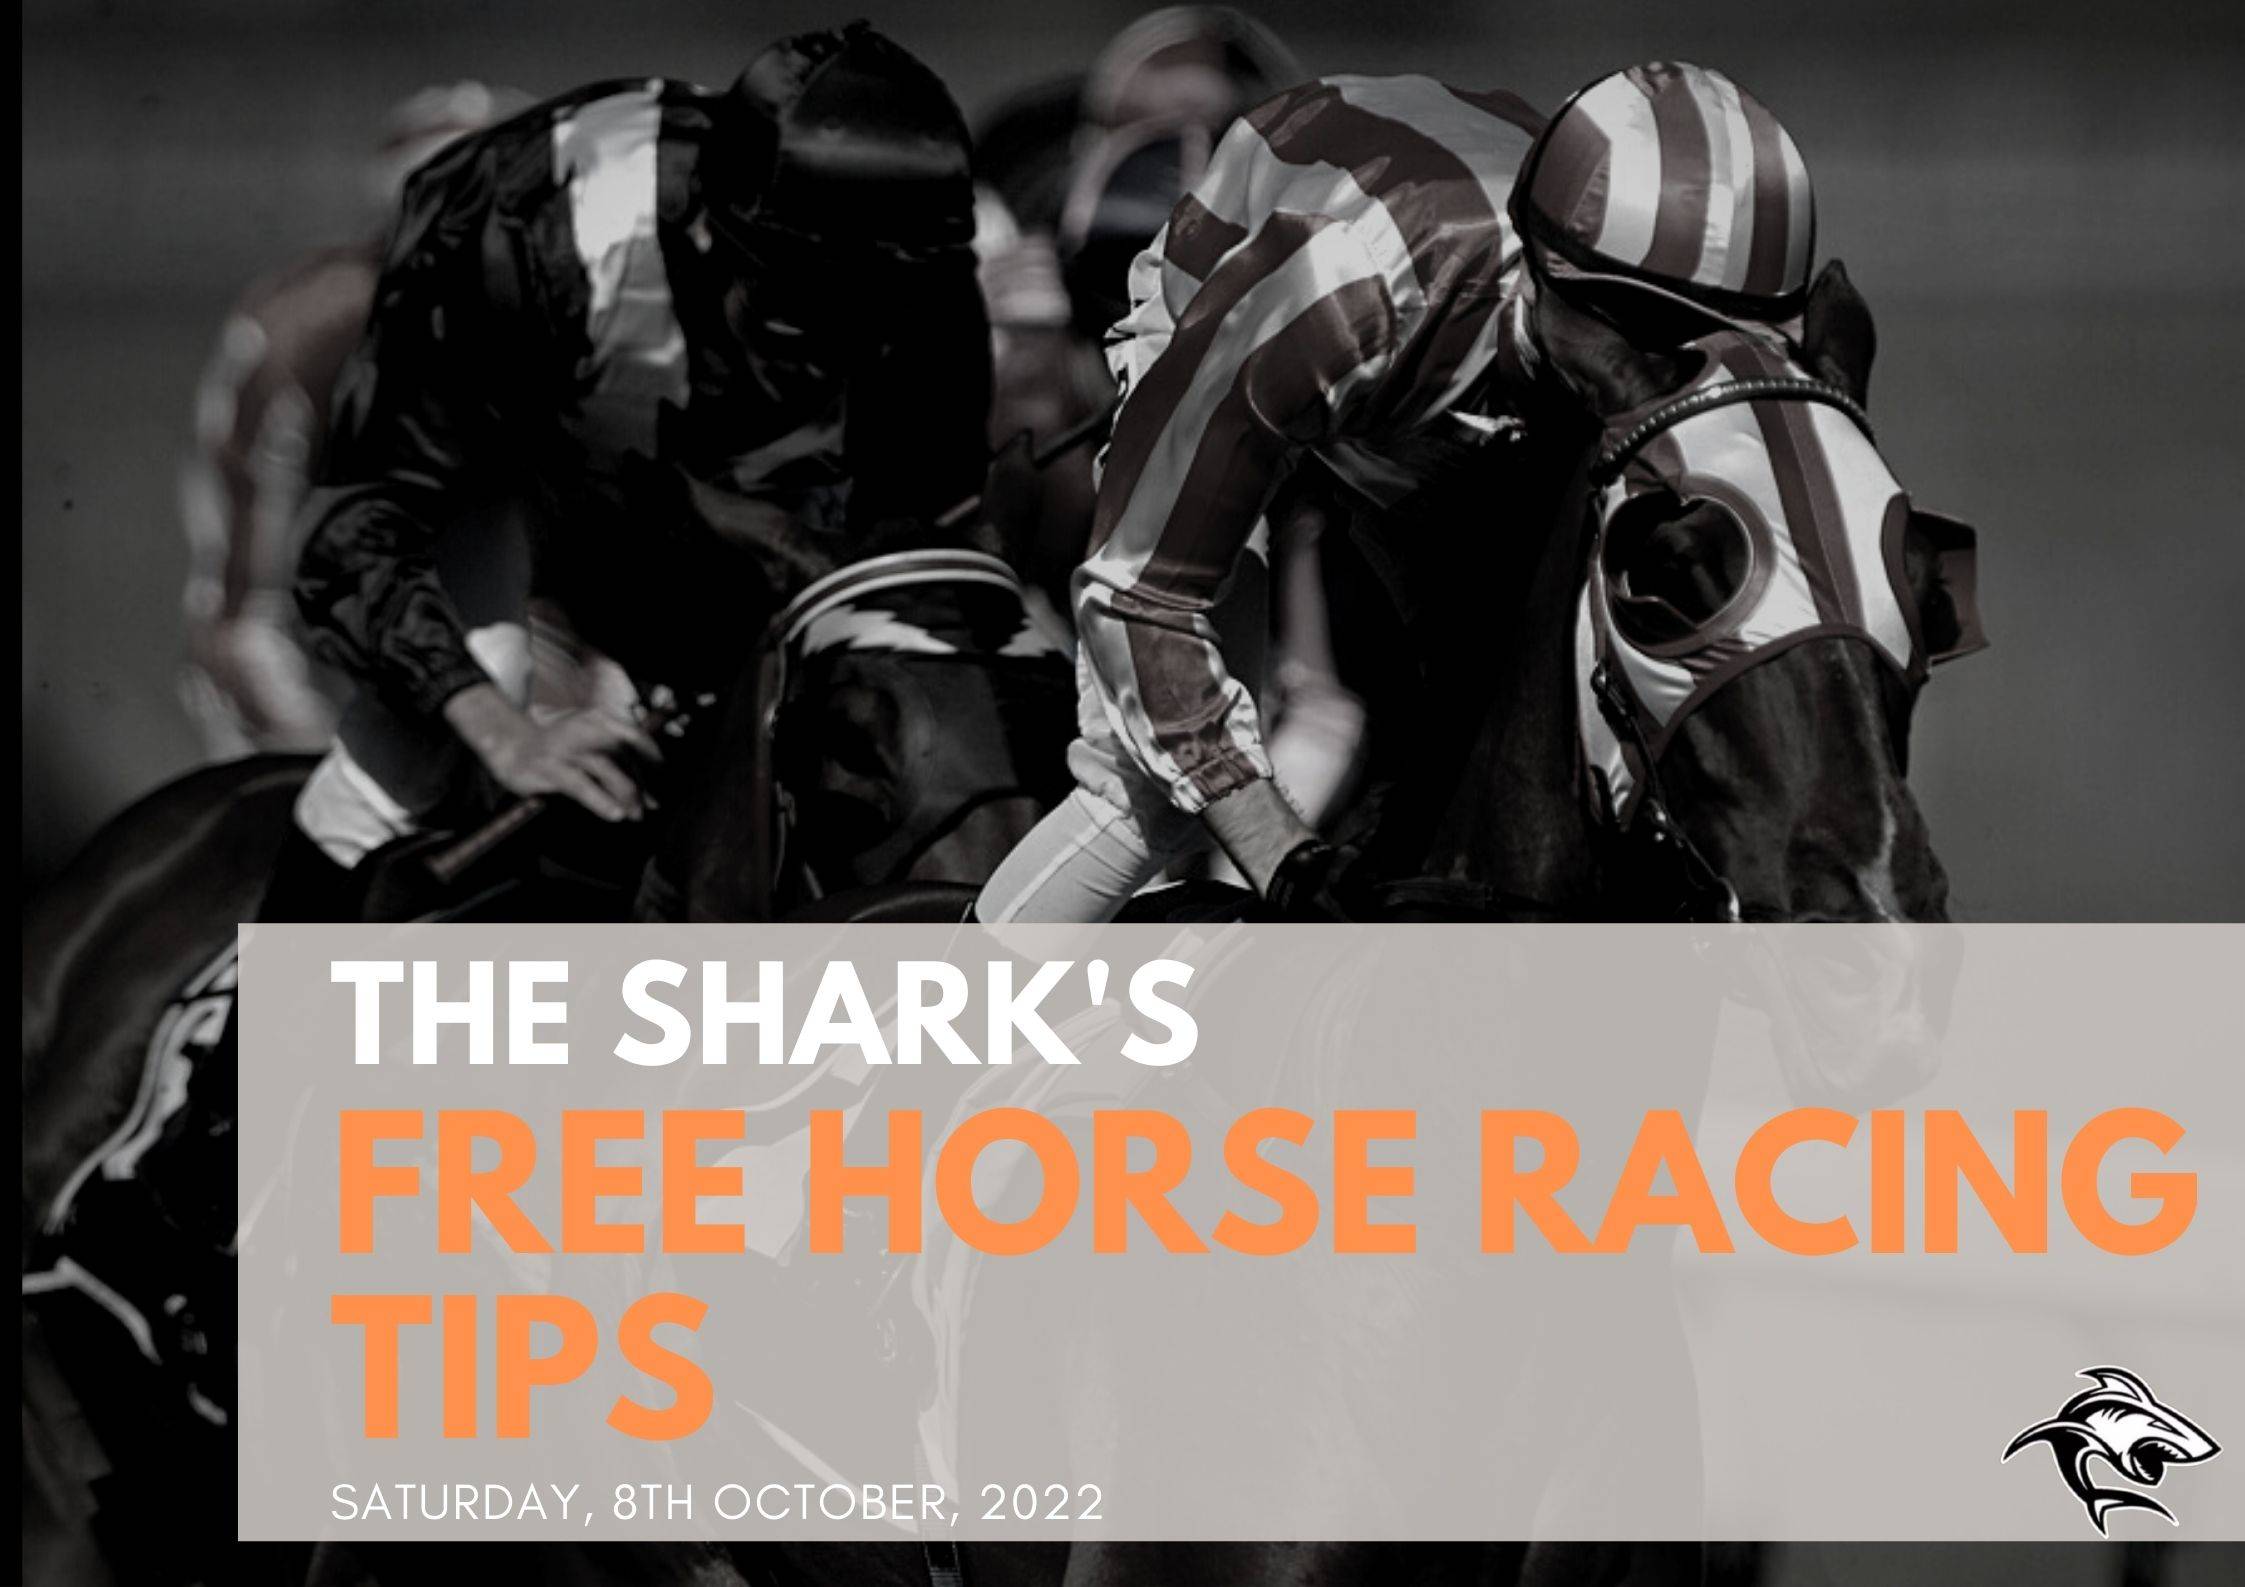 Free Horse Racing Tips - 8th Oct